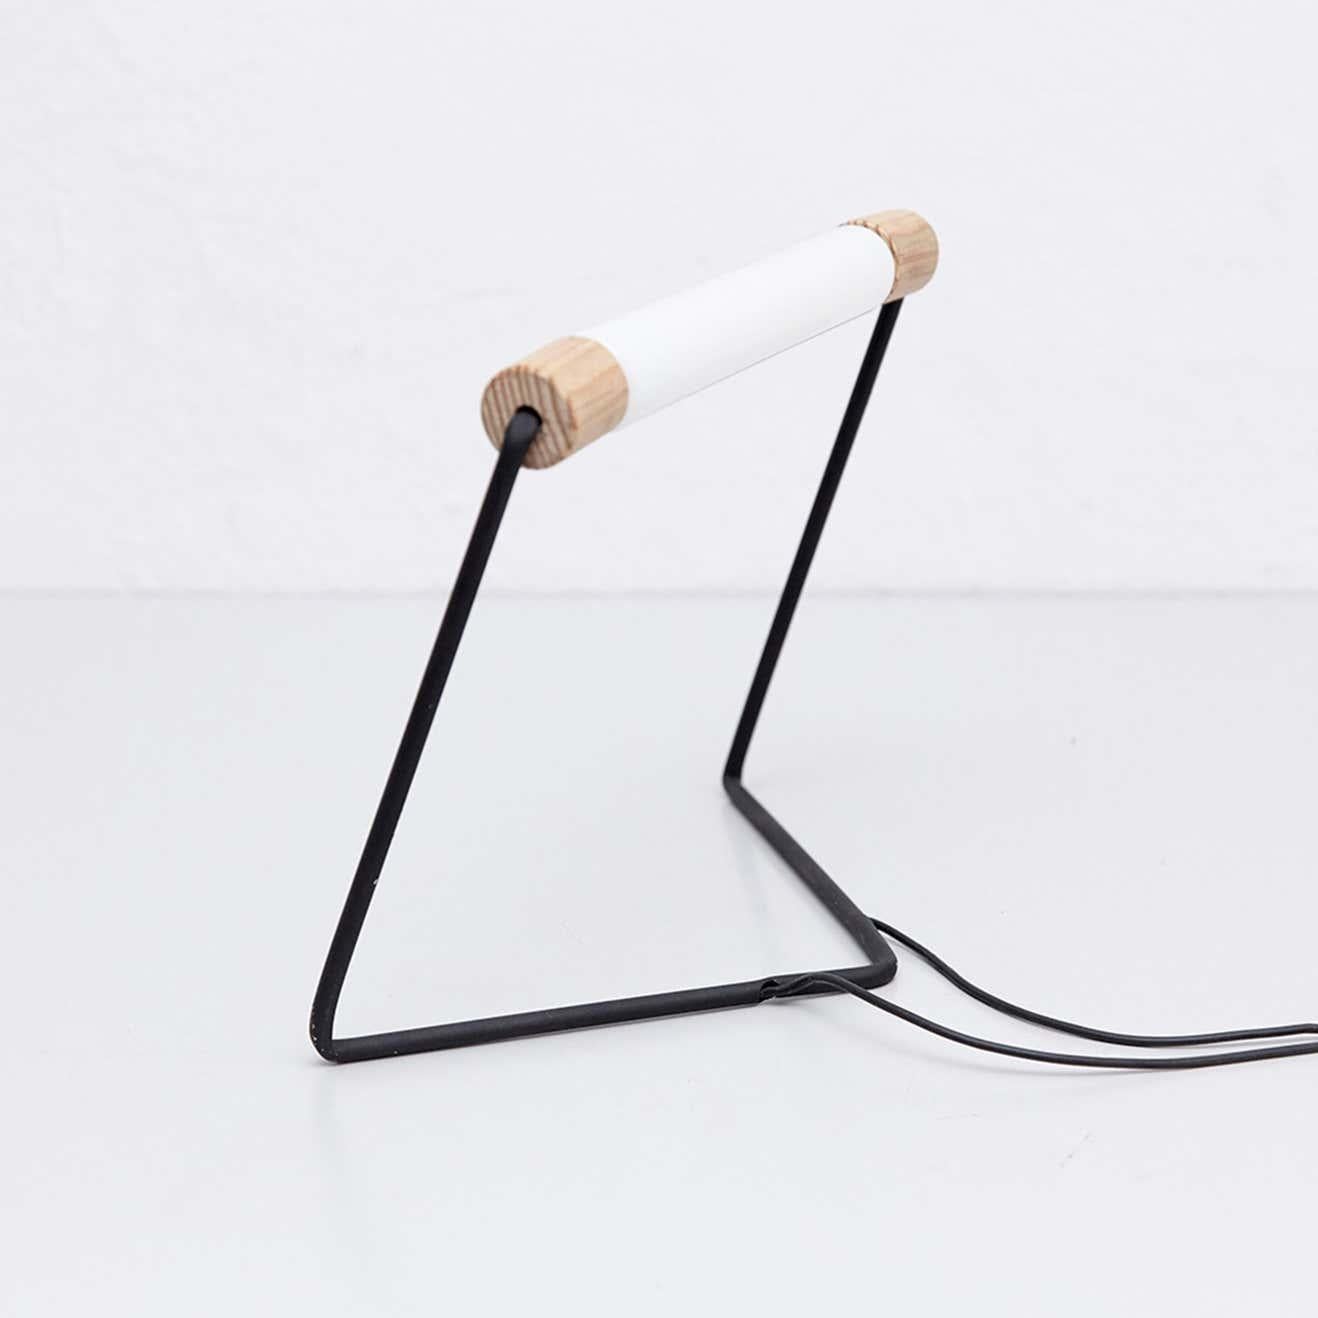 Spanish Industrial Minimal Table Lamp in Metal and Wood, circa 1990 For Sale